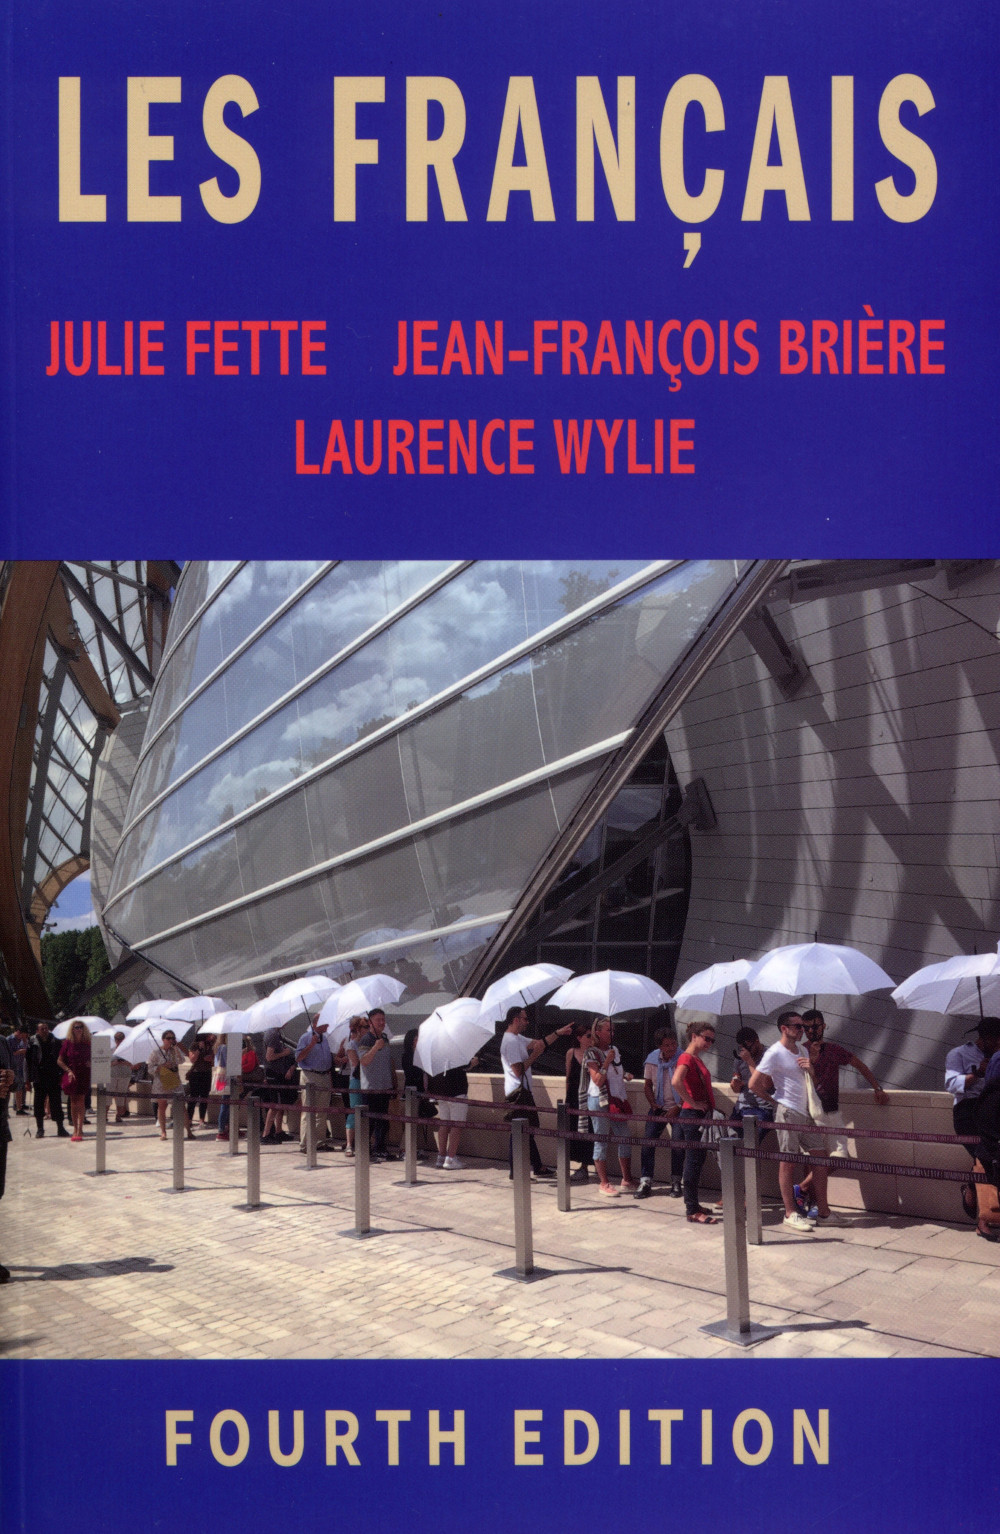 Les Français (Fourth Edition) Book Cover. People with white umbrellas waiting in line.